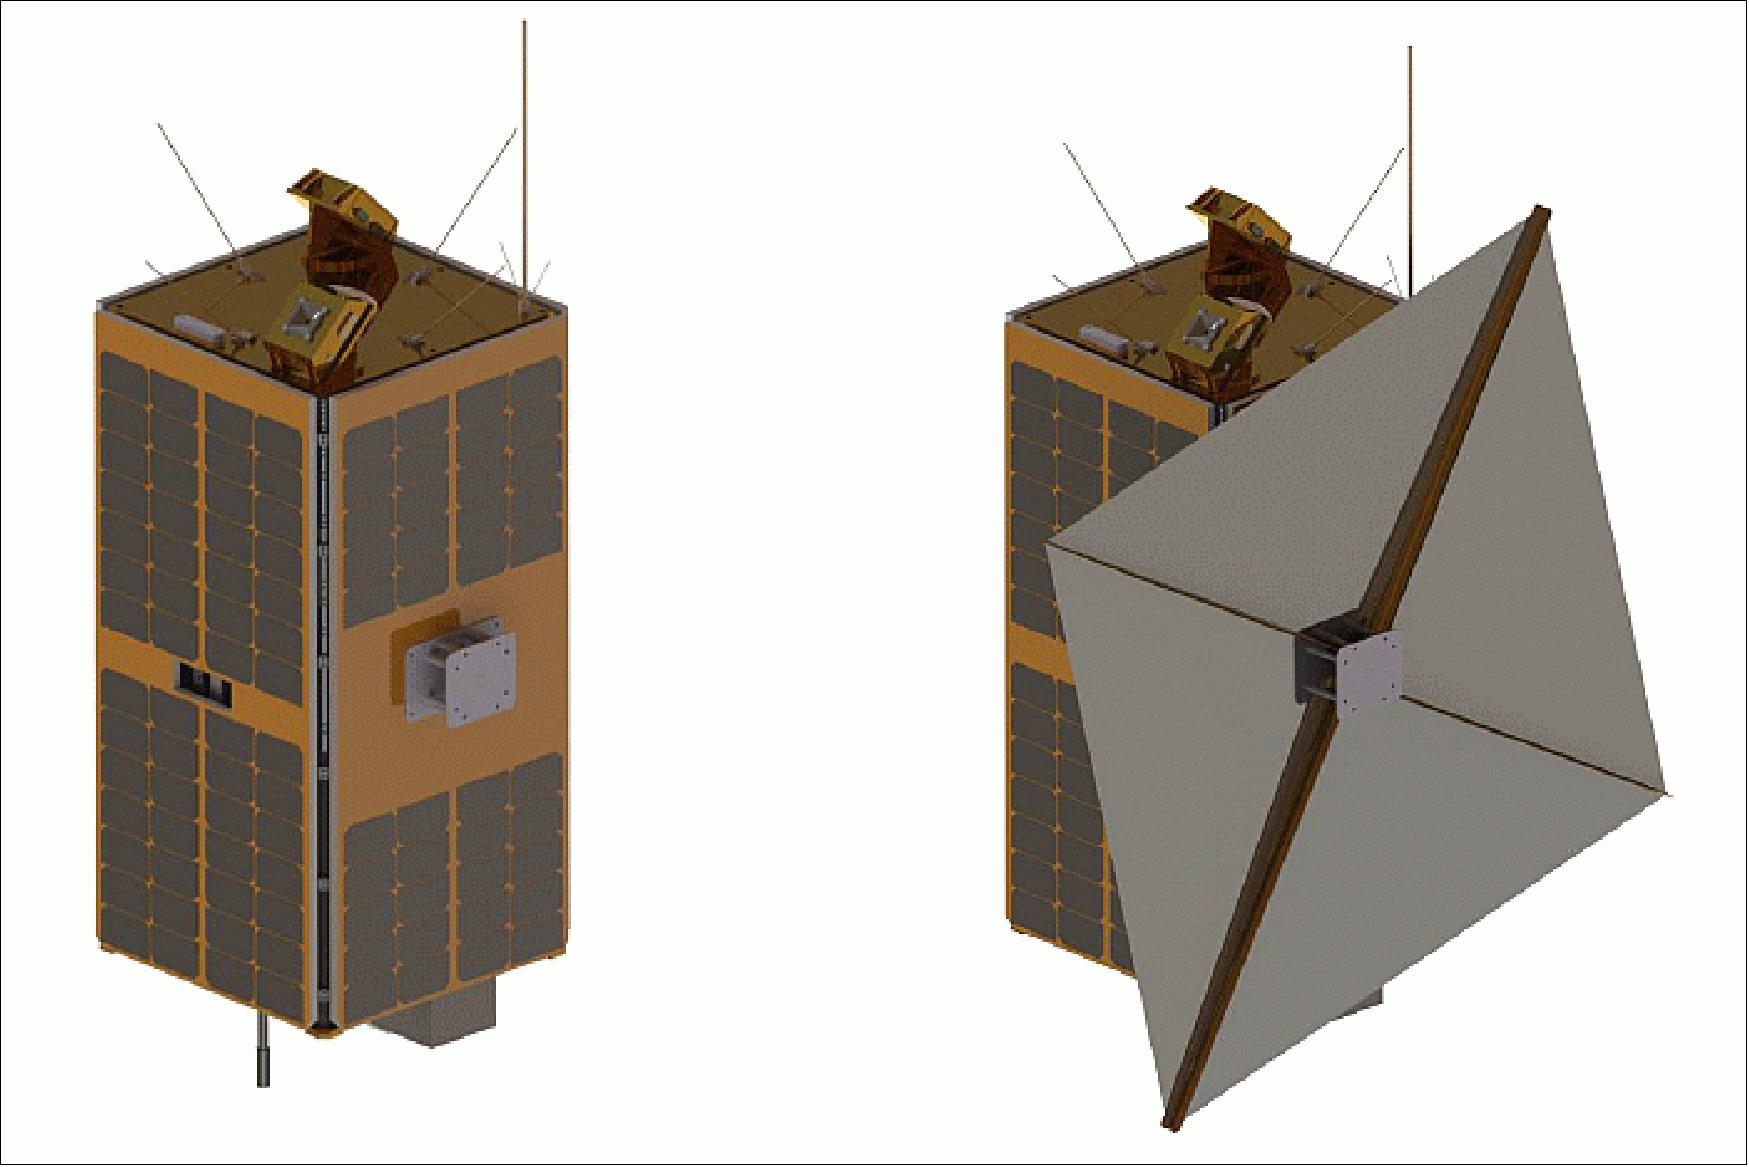 Figure 3: Illustration of the ESEO microsatellite with its DOM (De-Orbit Mechanism) in its stowed (left) and deployed (right) configuration (image credit: ALMASpace, ESA)